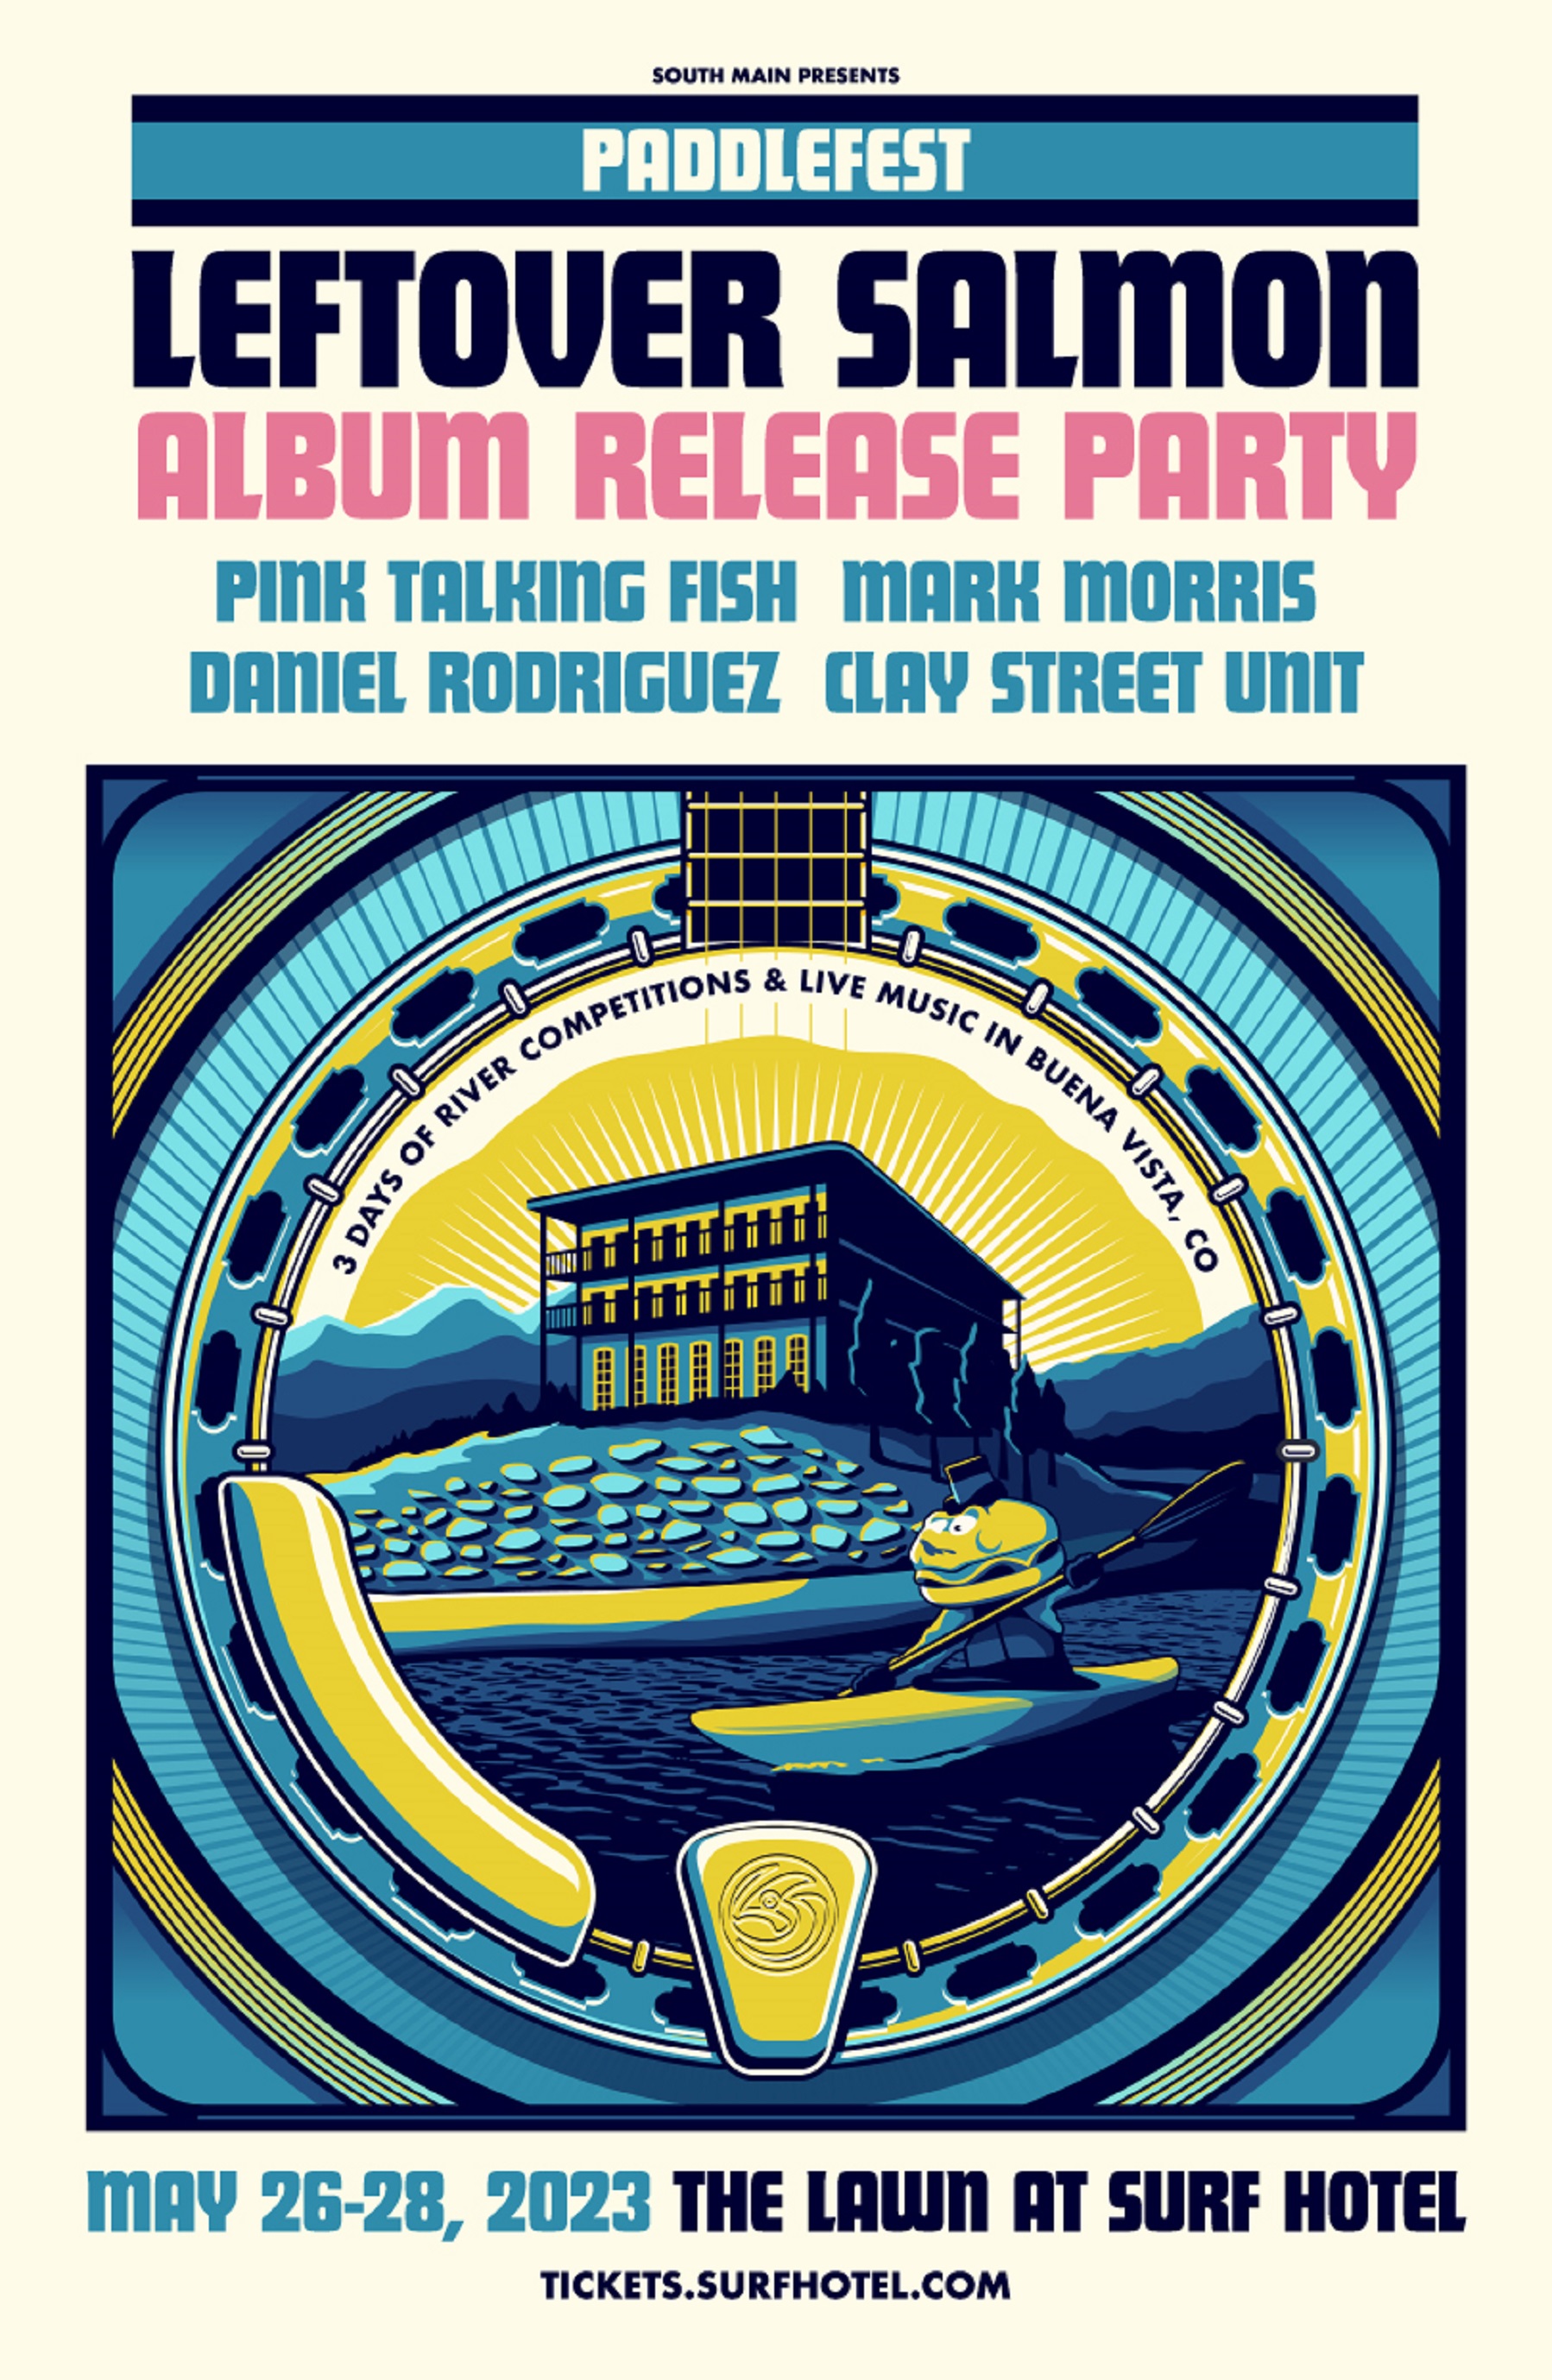 South Main Presents Leftover Salmon on The LAWN, the Official Album Release Party at Surf Hotel in Buena Vista, CO May 26th-28th